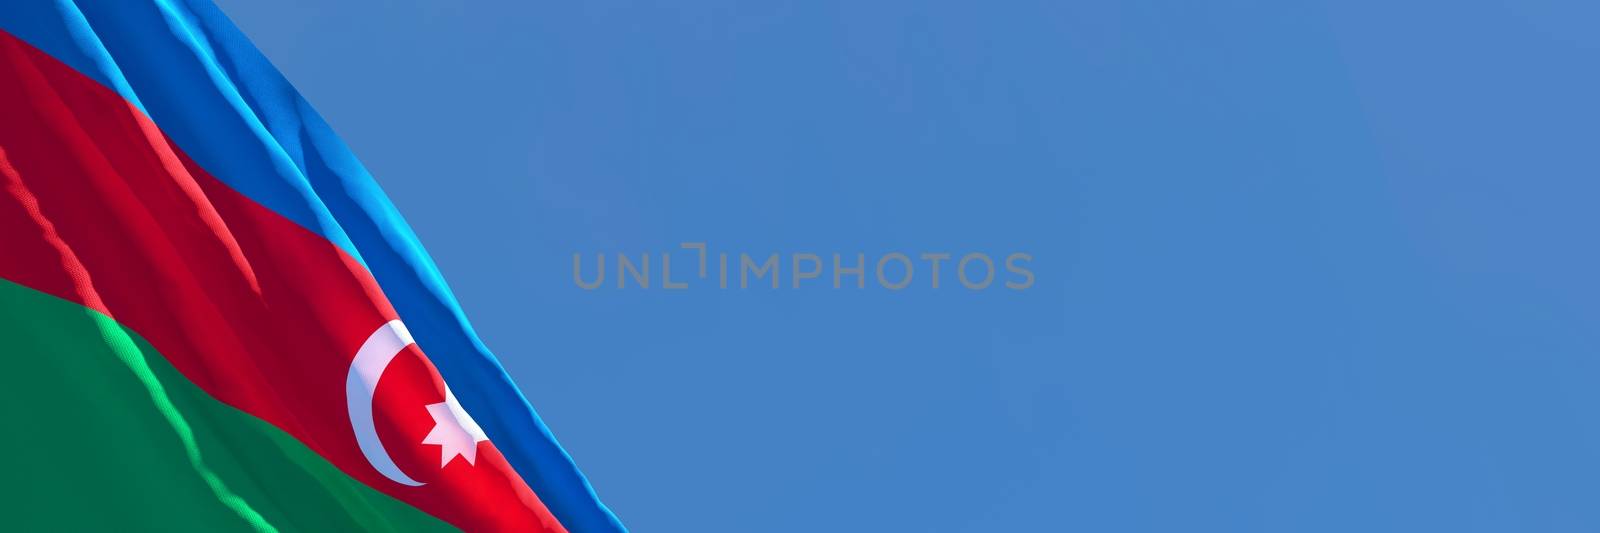 3D rendering of the national flag of Azerbaijan waving in the wind against a blue sky